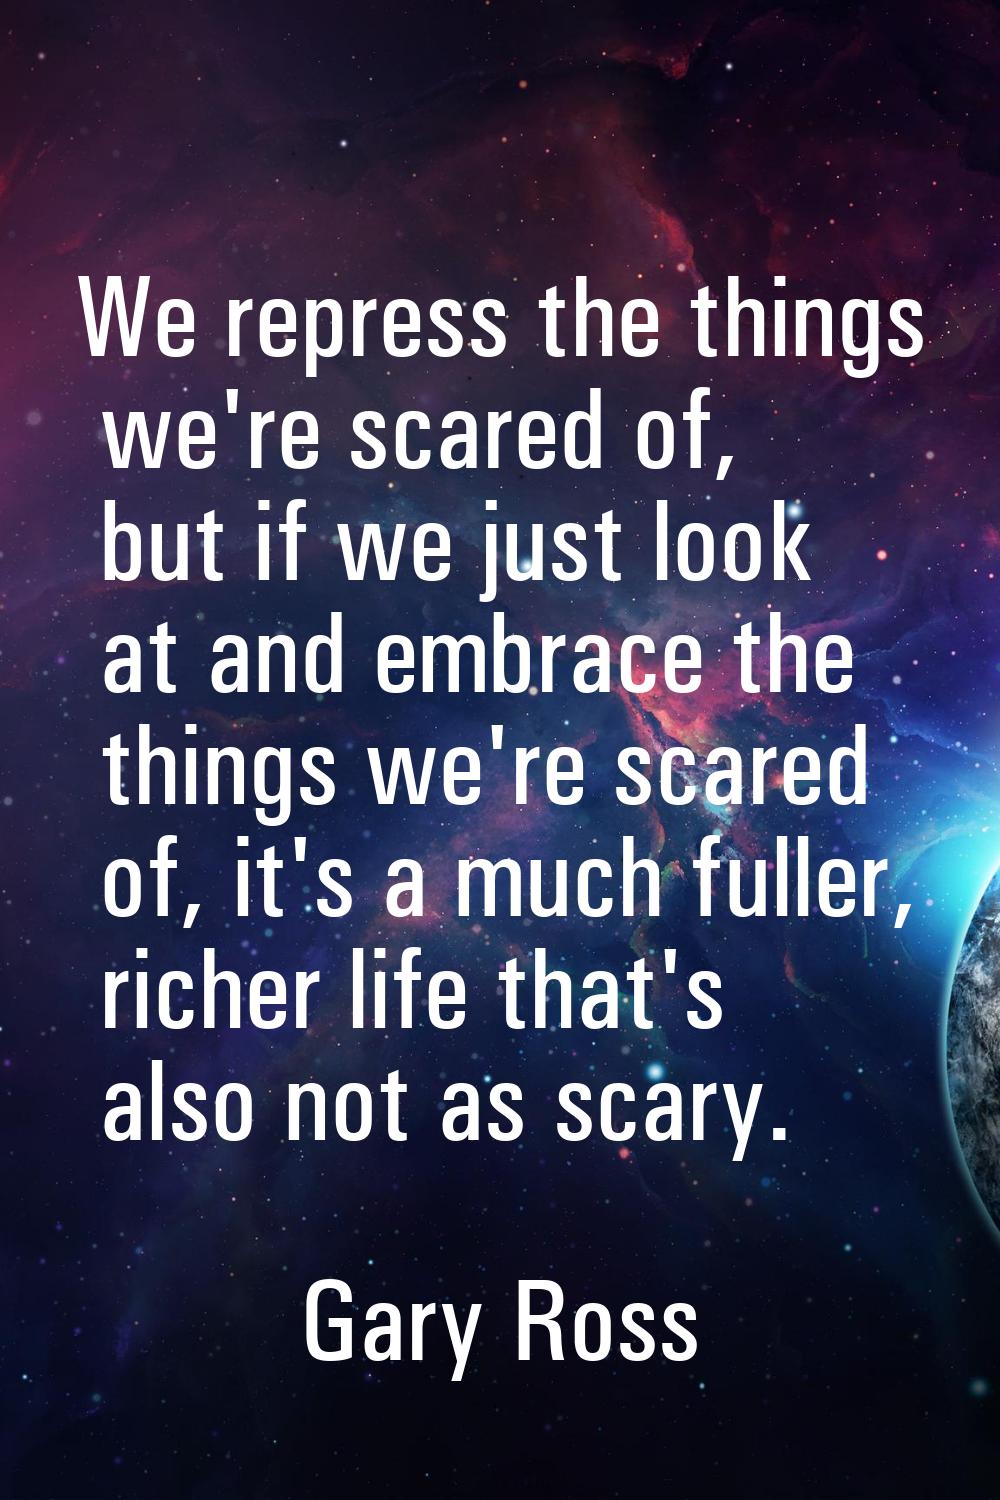 We repress the things we're scared of, but if we just look at and embrace the things we're scared o